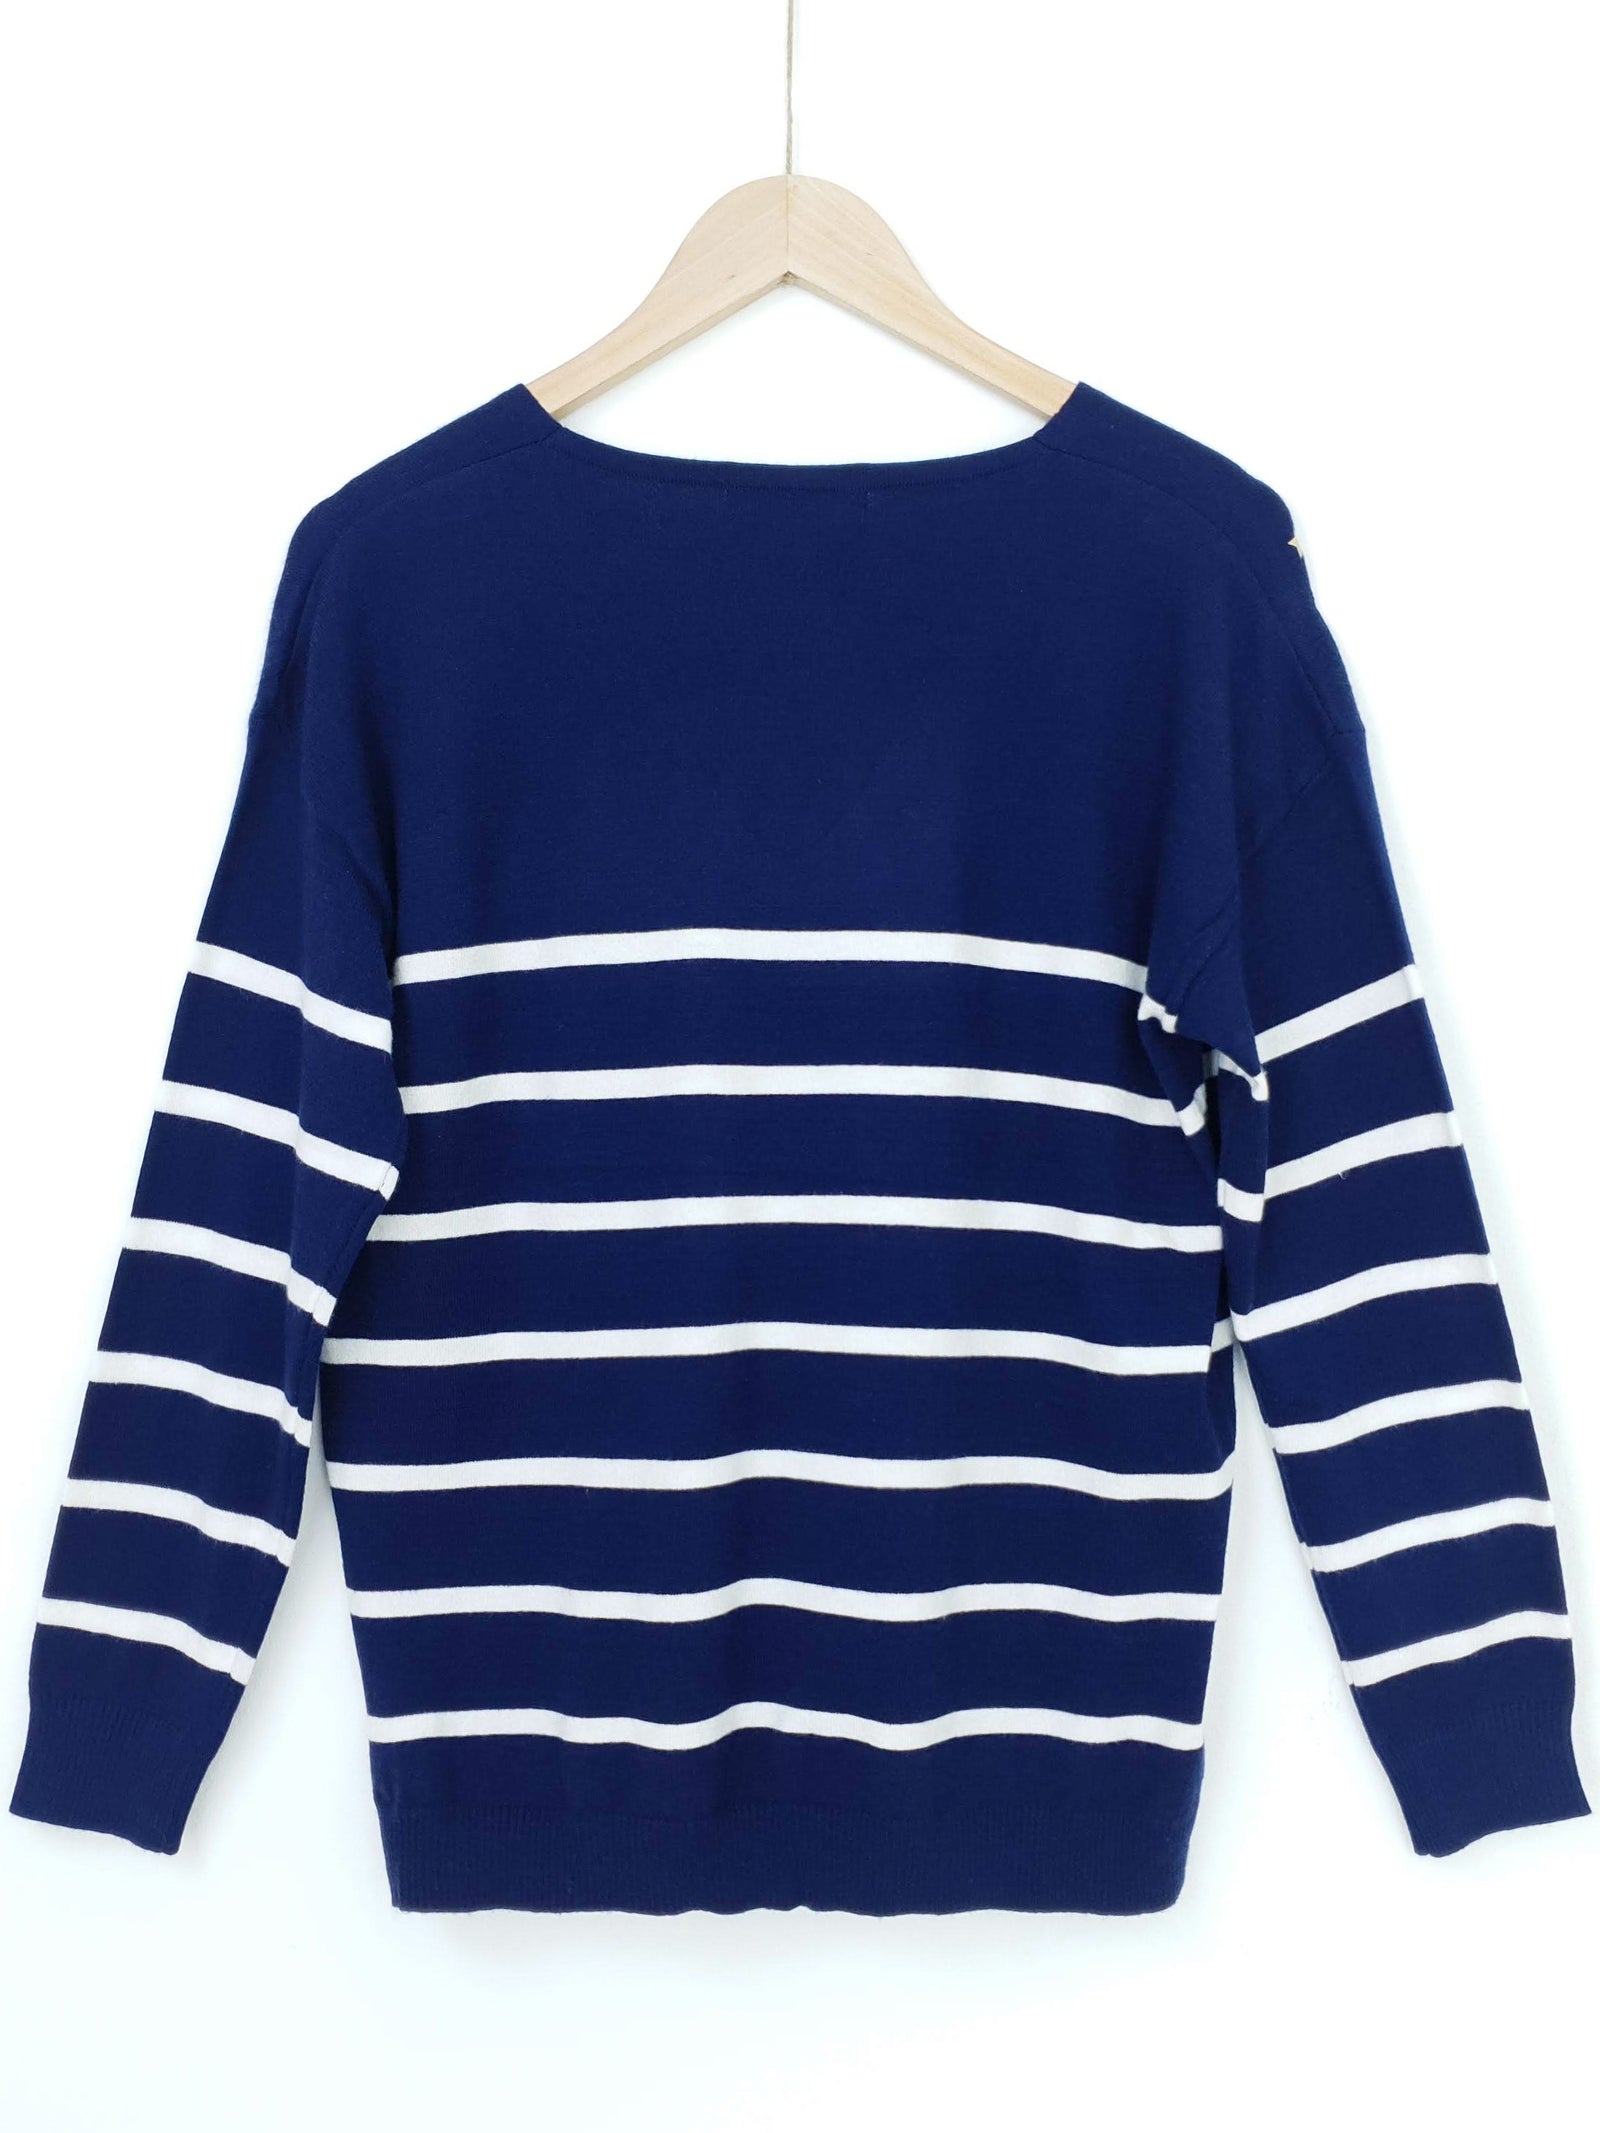 ALICIA | Knitted Star & Striped Jumper | Navy